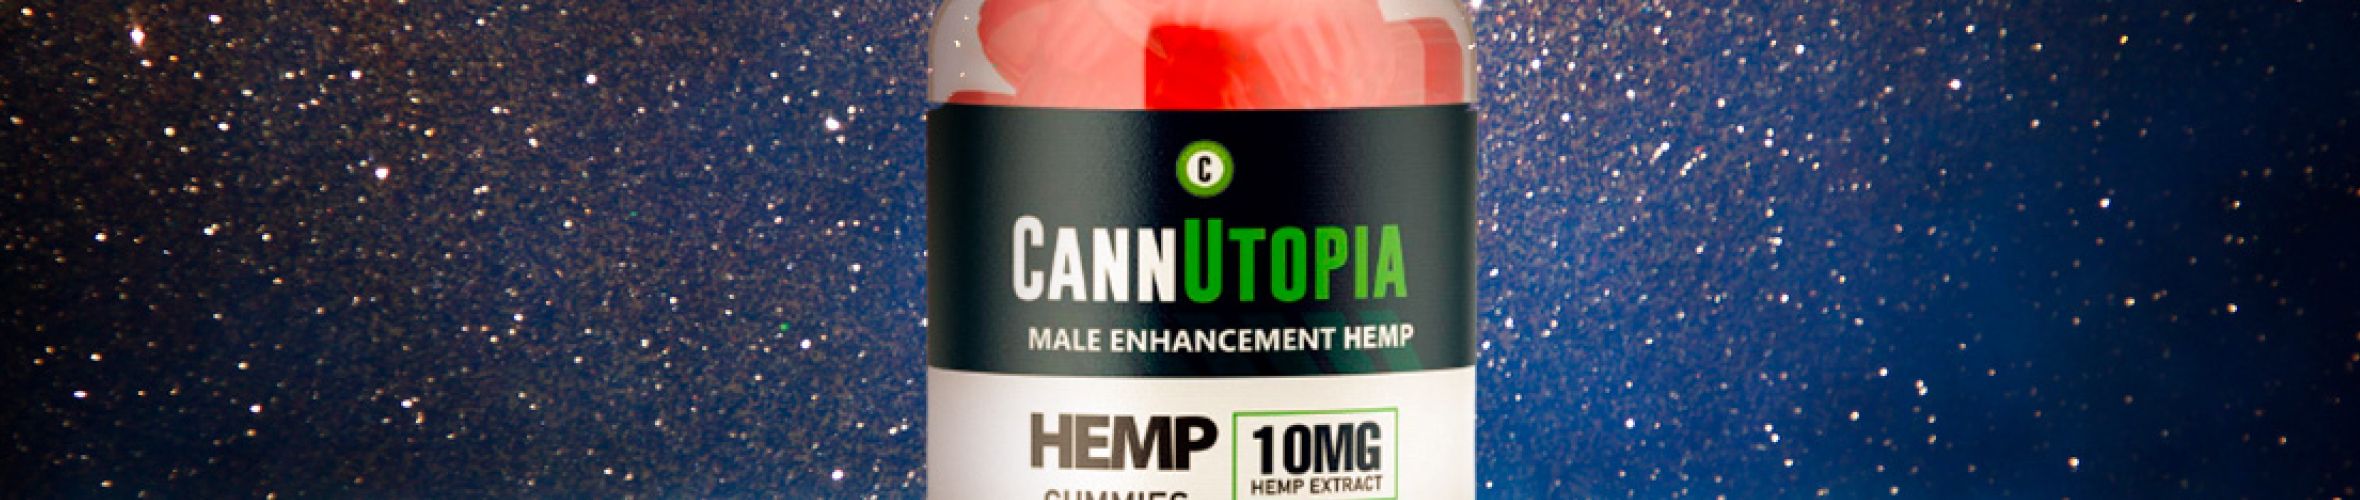 cannutopia review